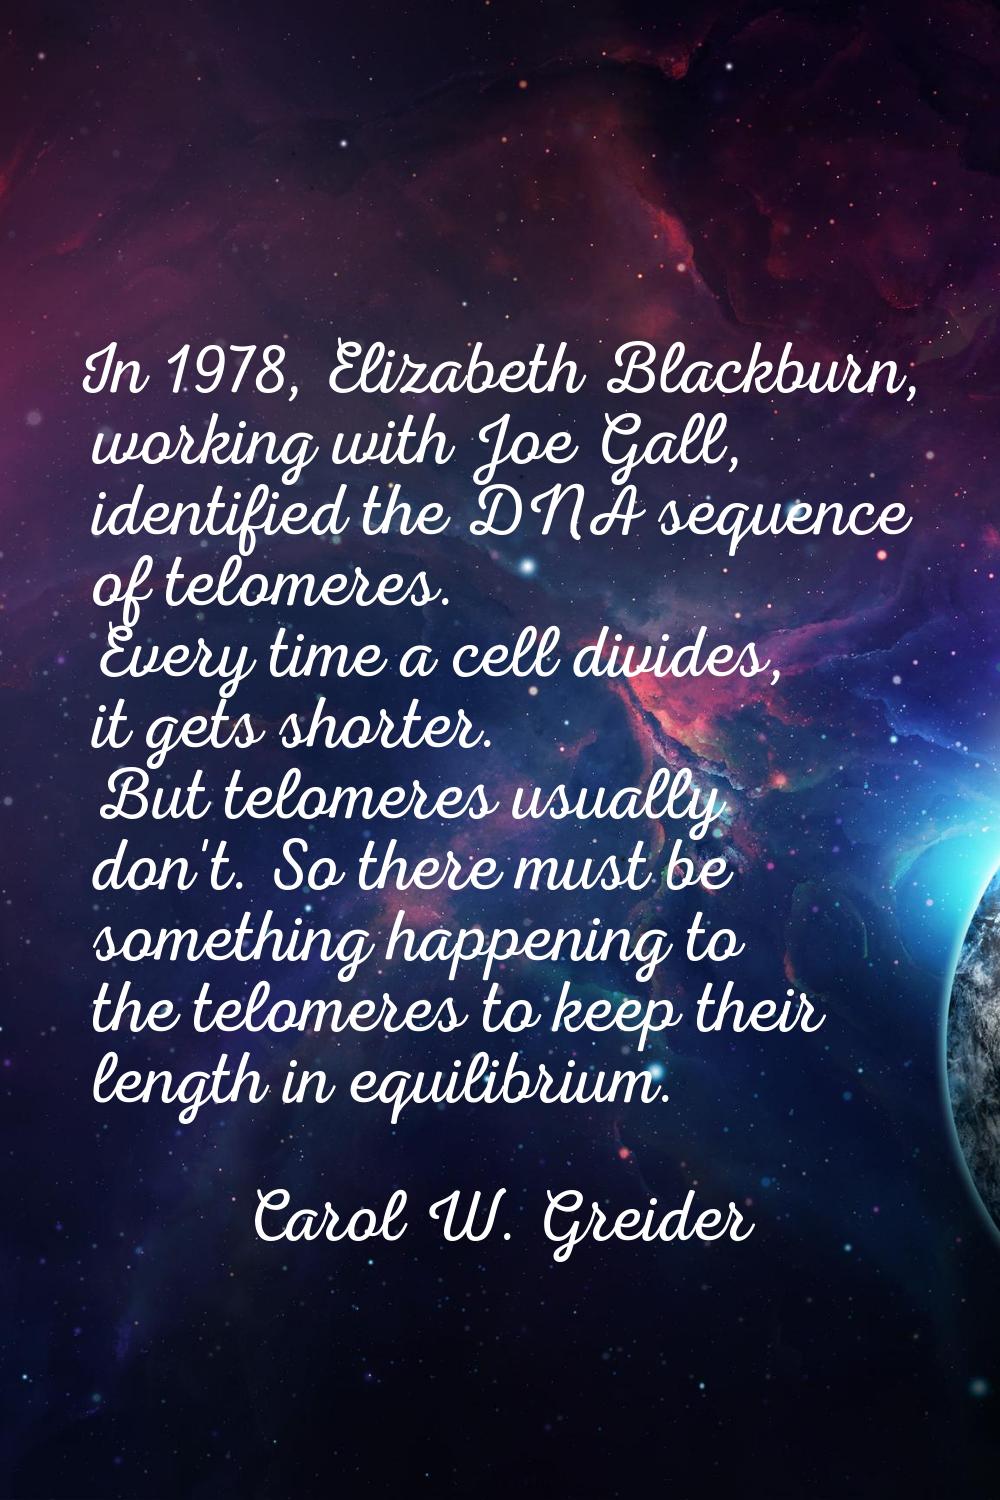 In 1978, Elizabeth Blackburn, working with Joe Gall, identified the DNA sequence of telomeres. Ever